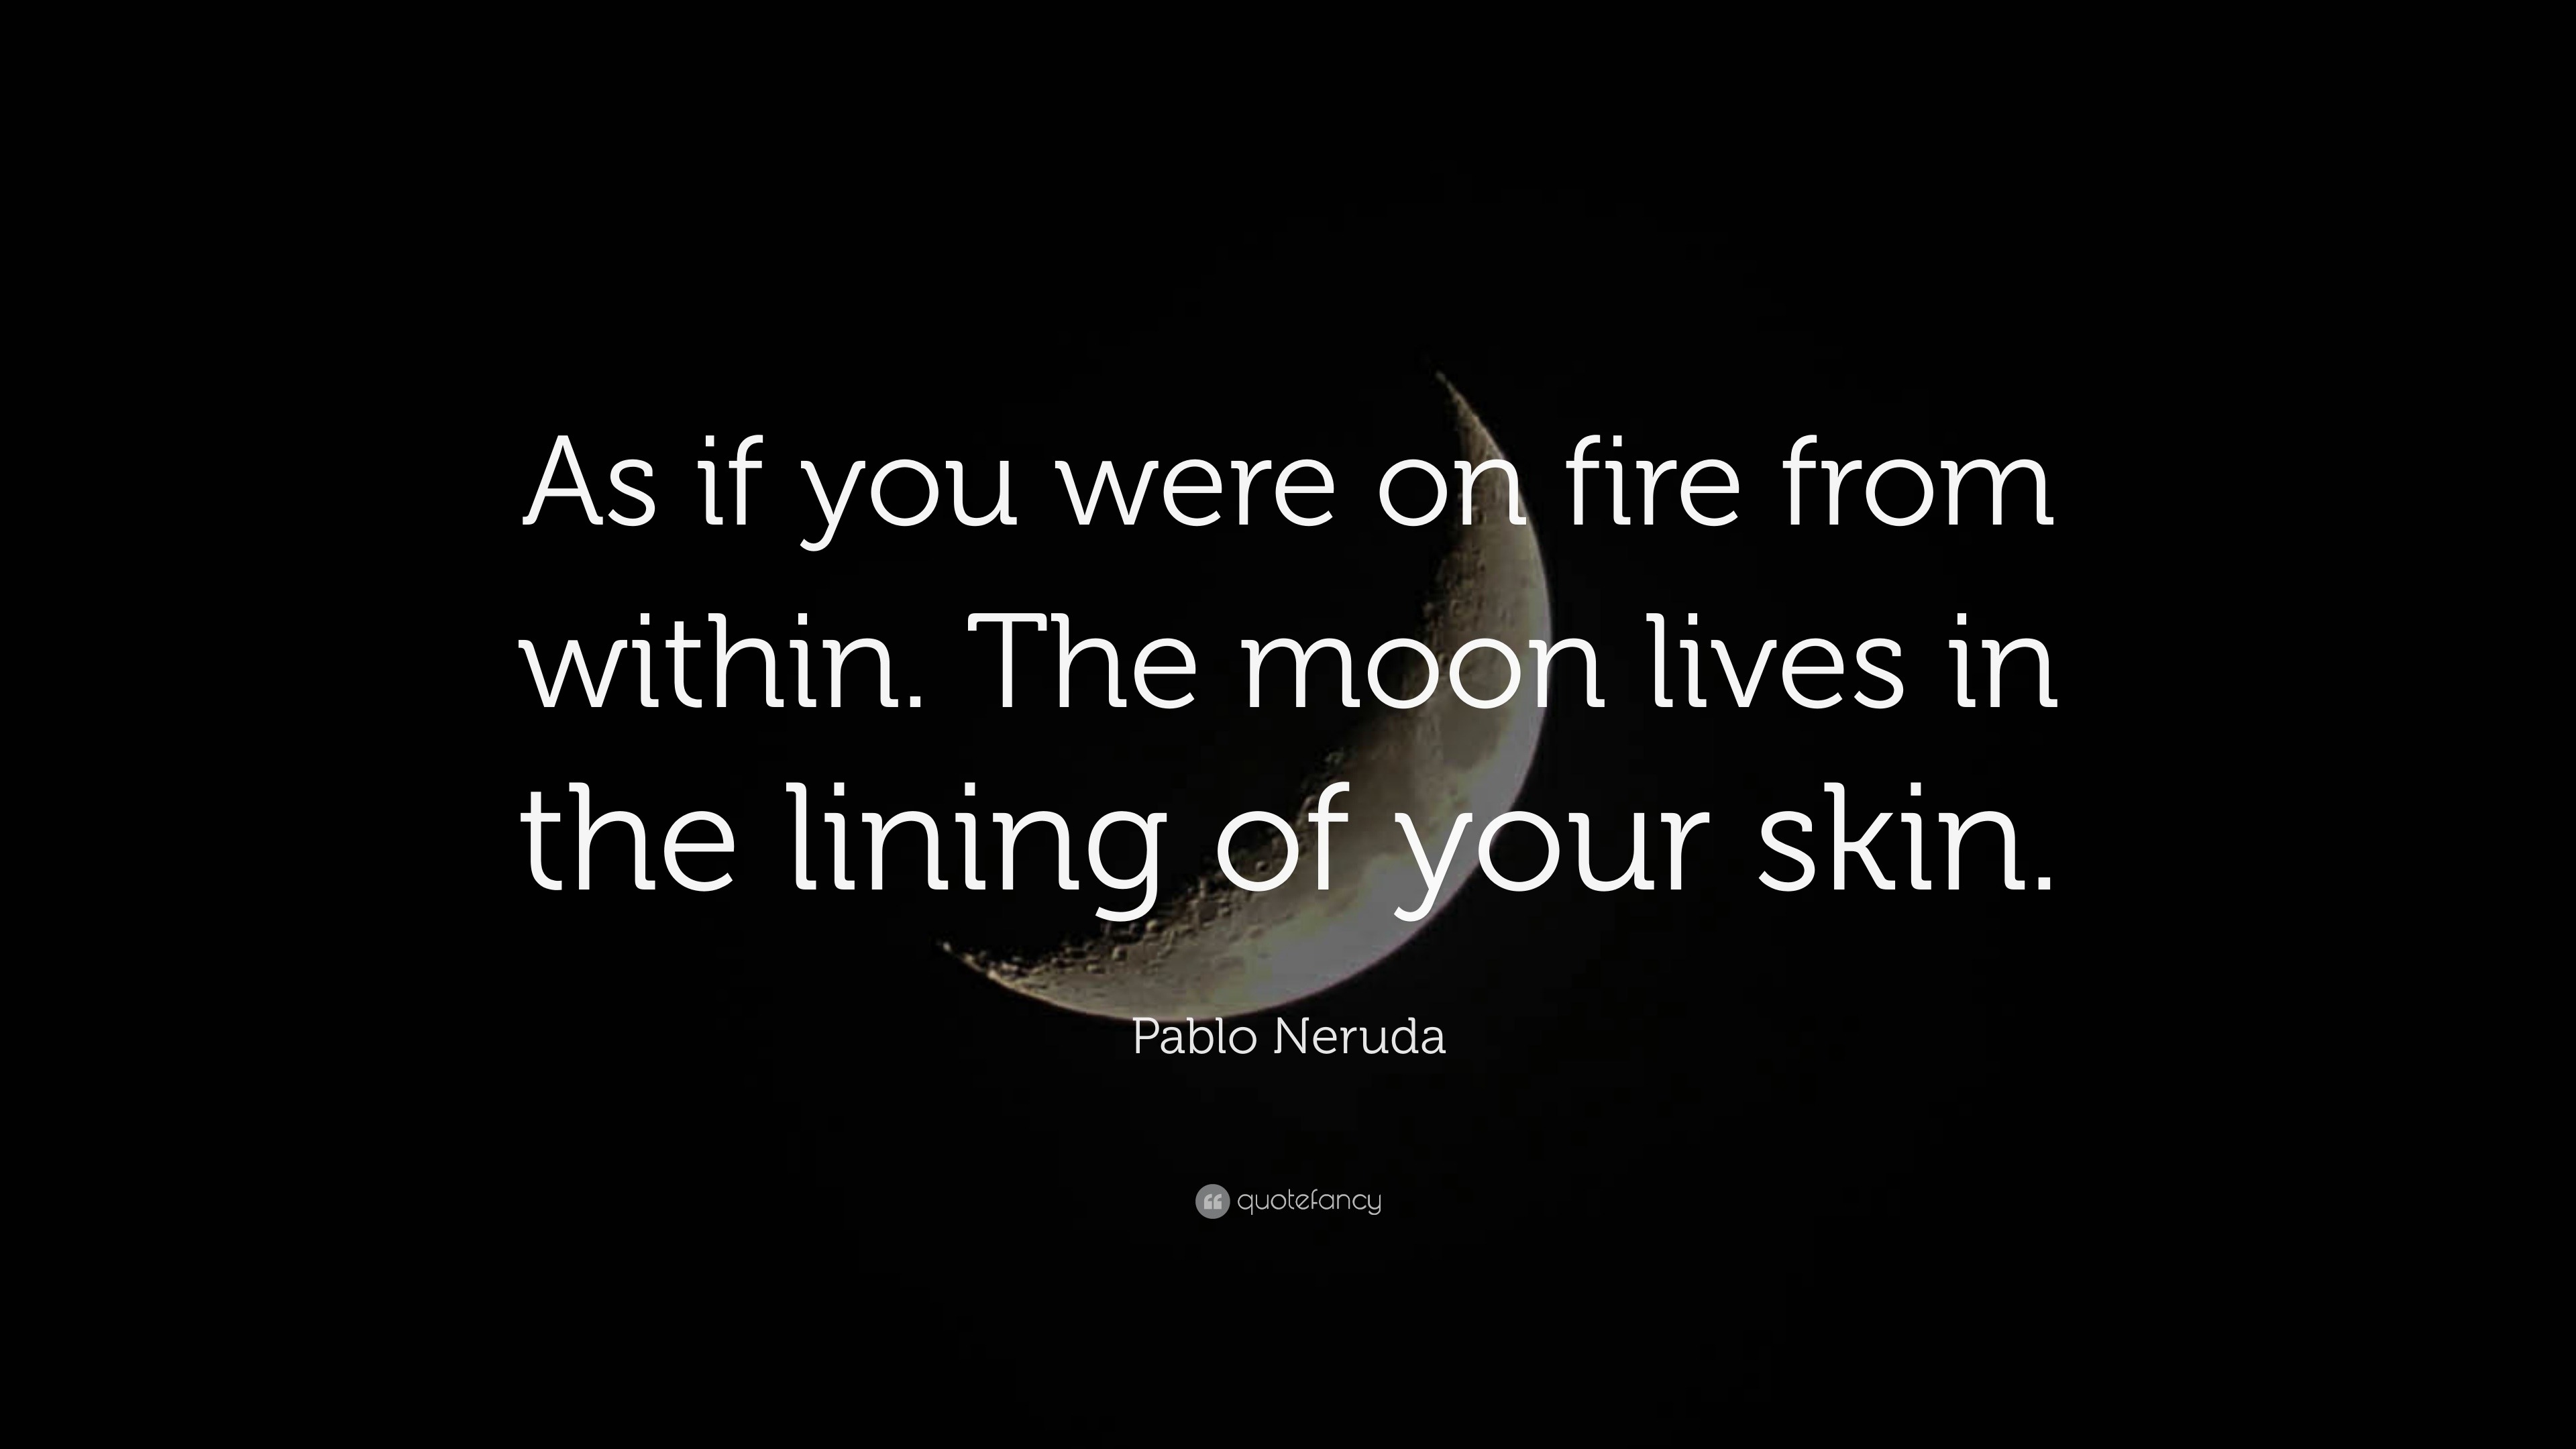 Pablo Neruda Quote As If You Were On Fire From Within The Moon